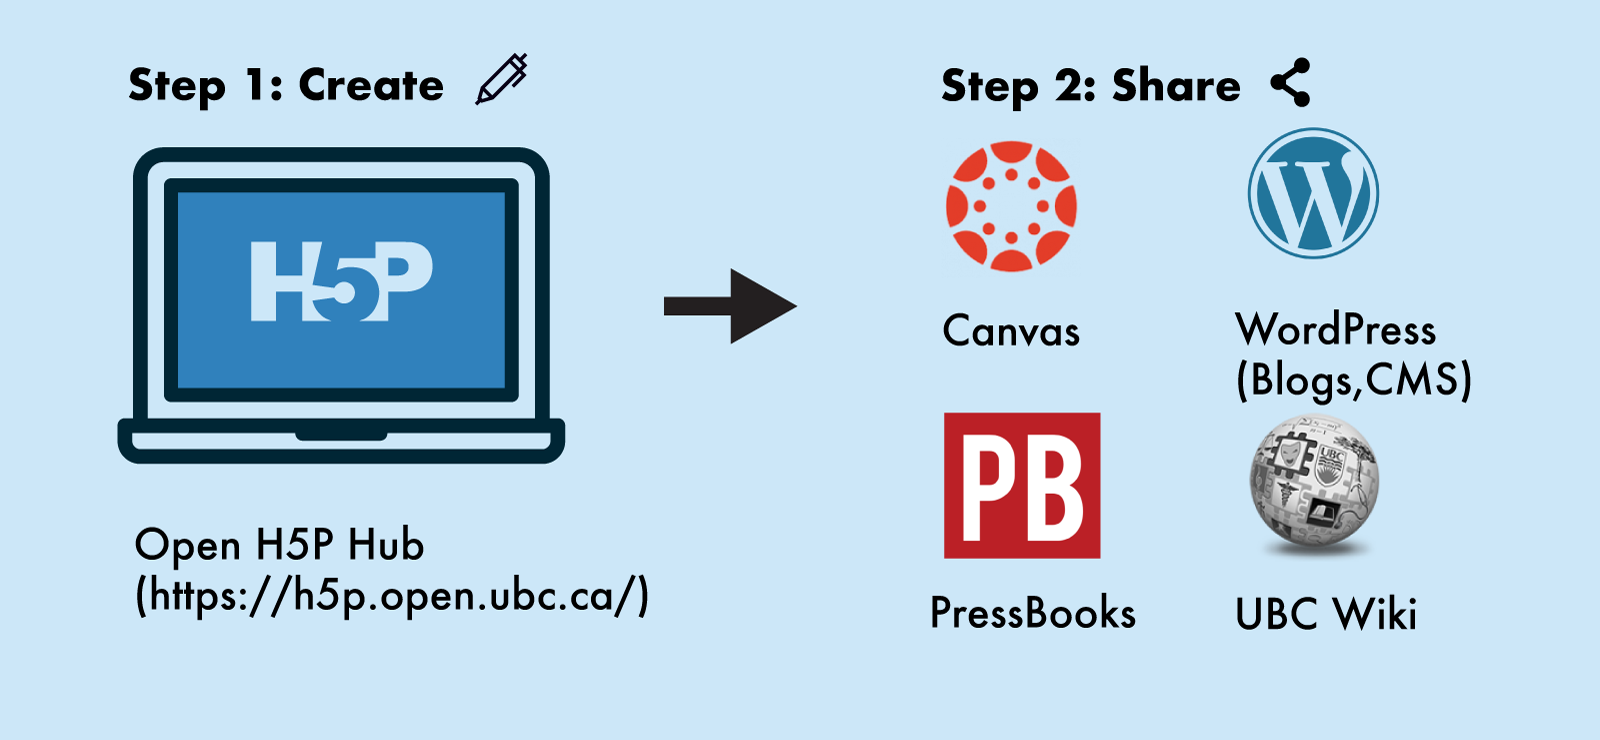 A banner image with the text 'Step 1: Create' and 'Step 2: Share'. Under step 1 is a cartoon image of a laptop with the H5P logo on it. Under step 2 are logos for Canvas, WordPress, Pressbooks and UBC wiki. At the bottom is the text 'Open H5P Hub https://h5p.open.ubc.ca')